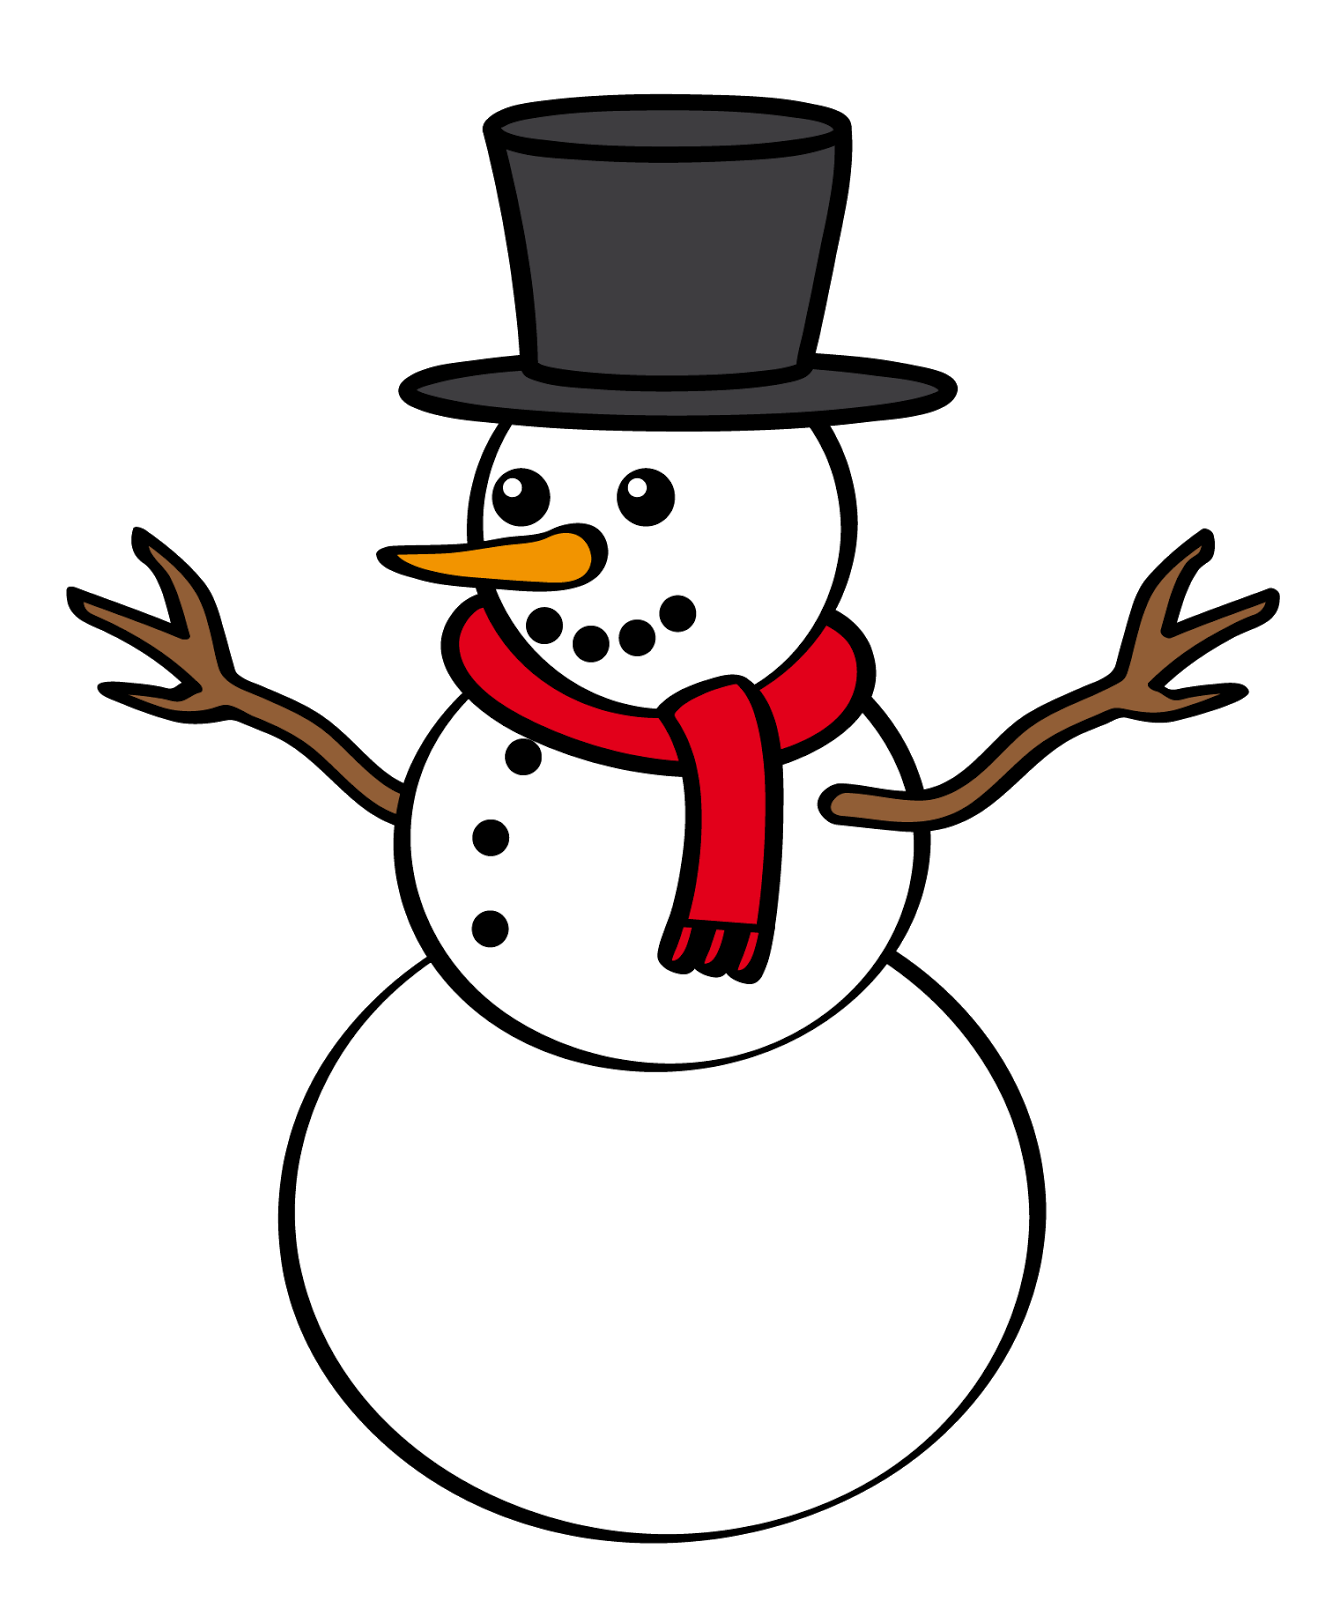 Snowman clipart january. Pencil and in color